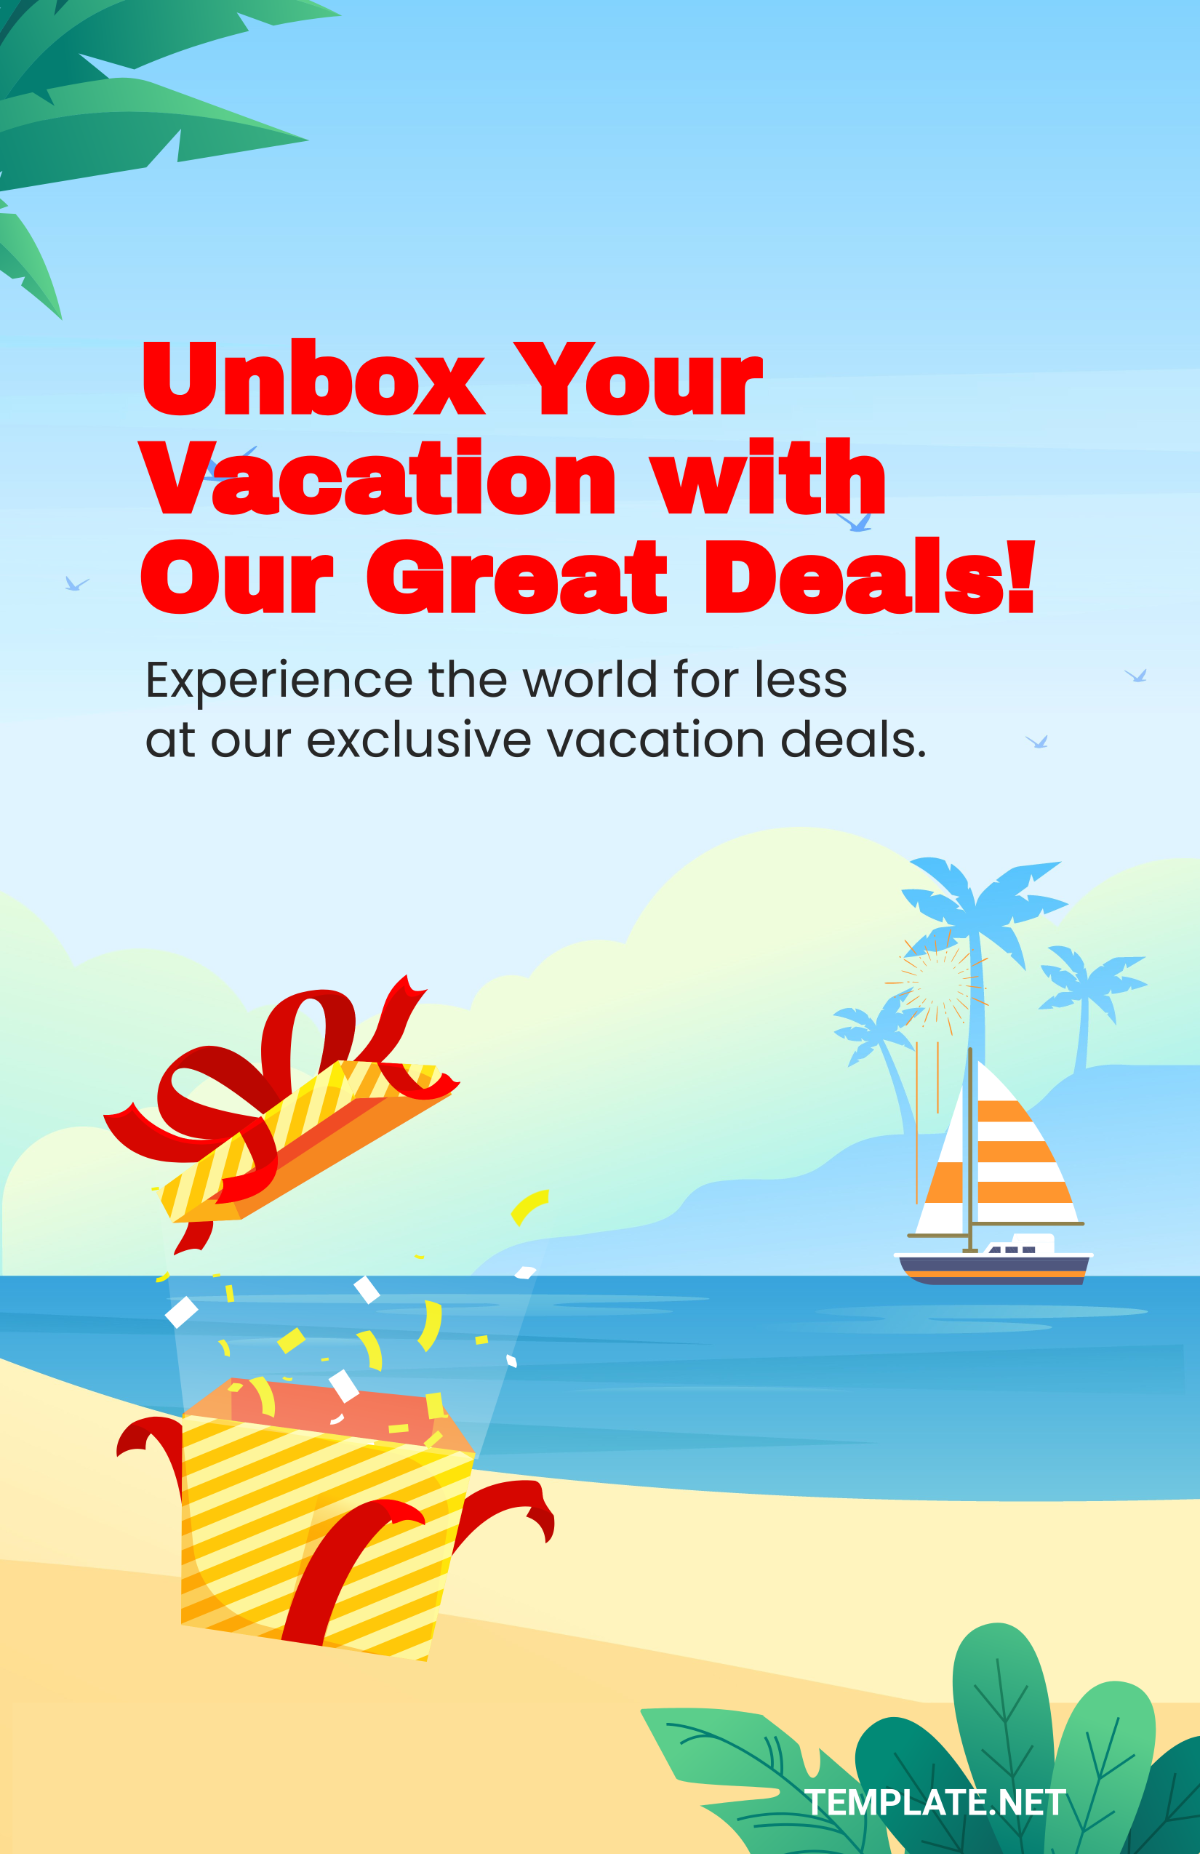 Simple Boxing Day Vacation Deals